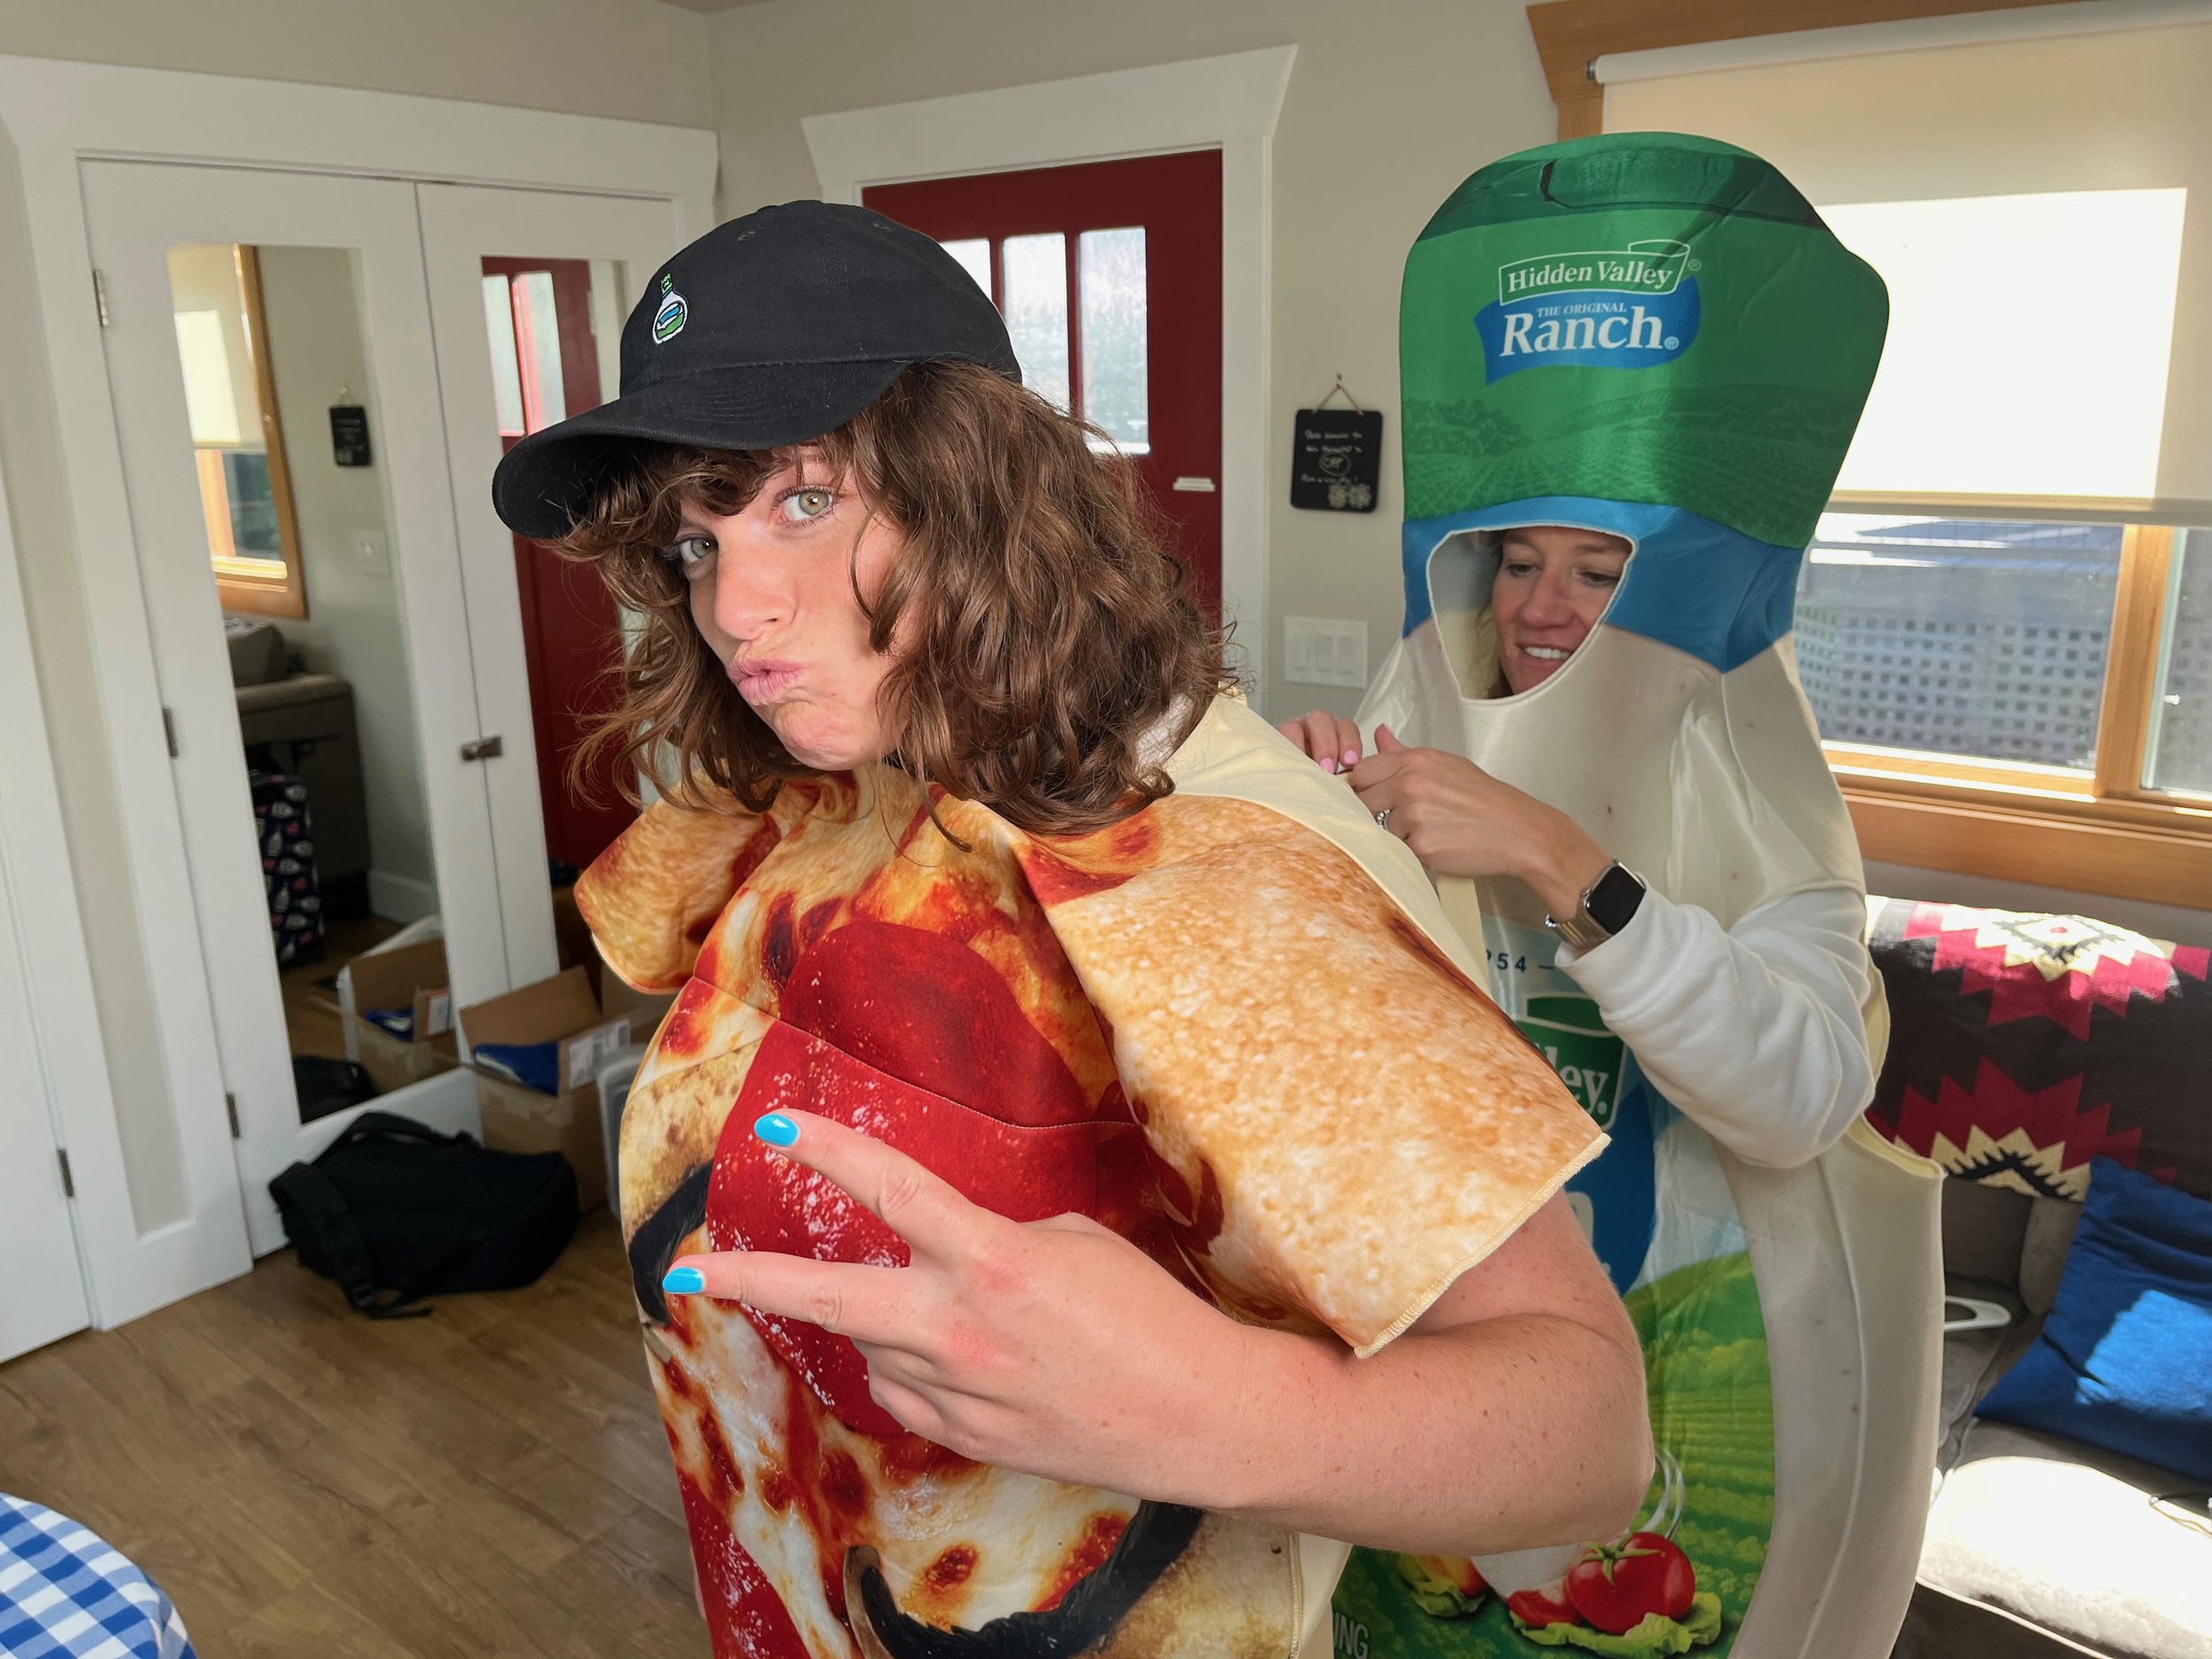 Pizza costume at the Hidden Valley Ranch shoot